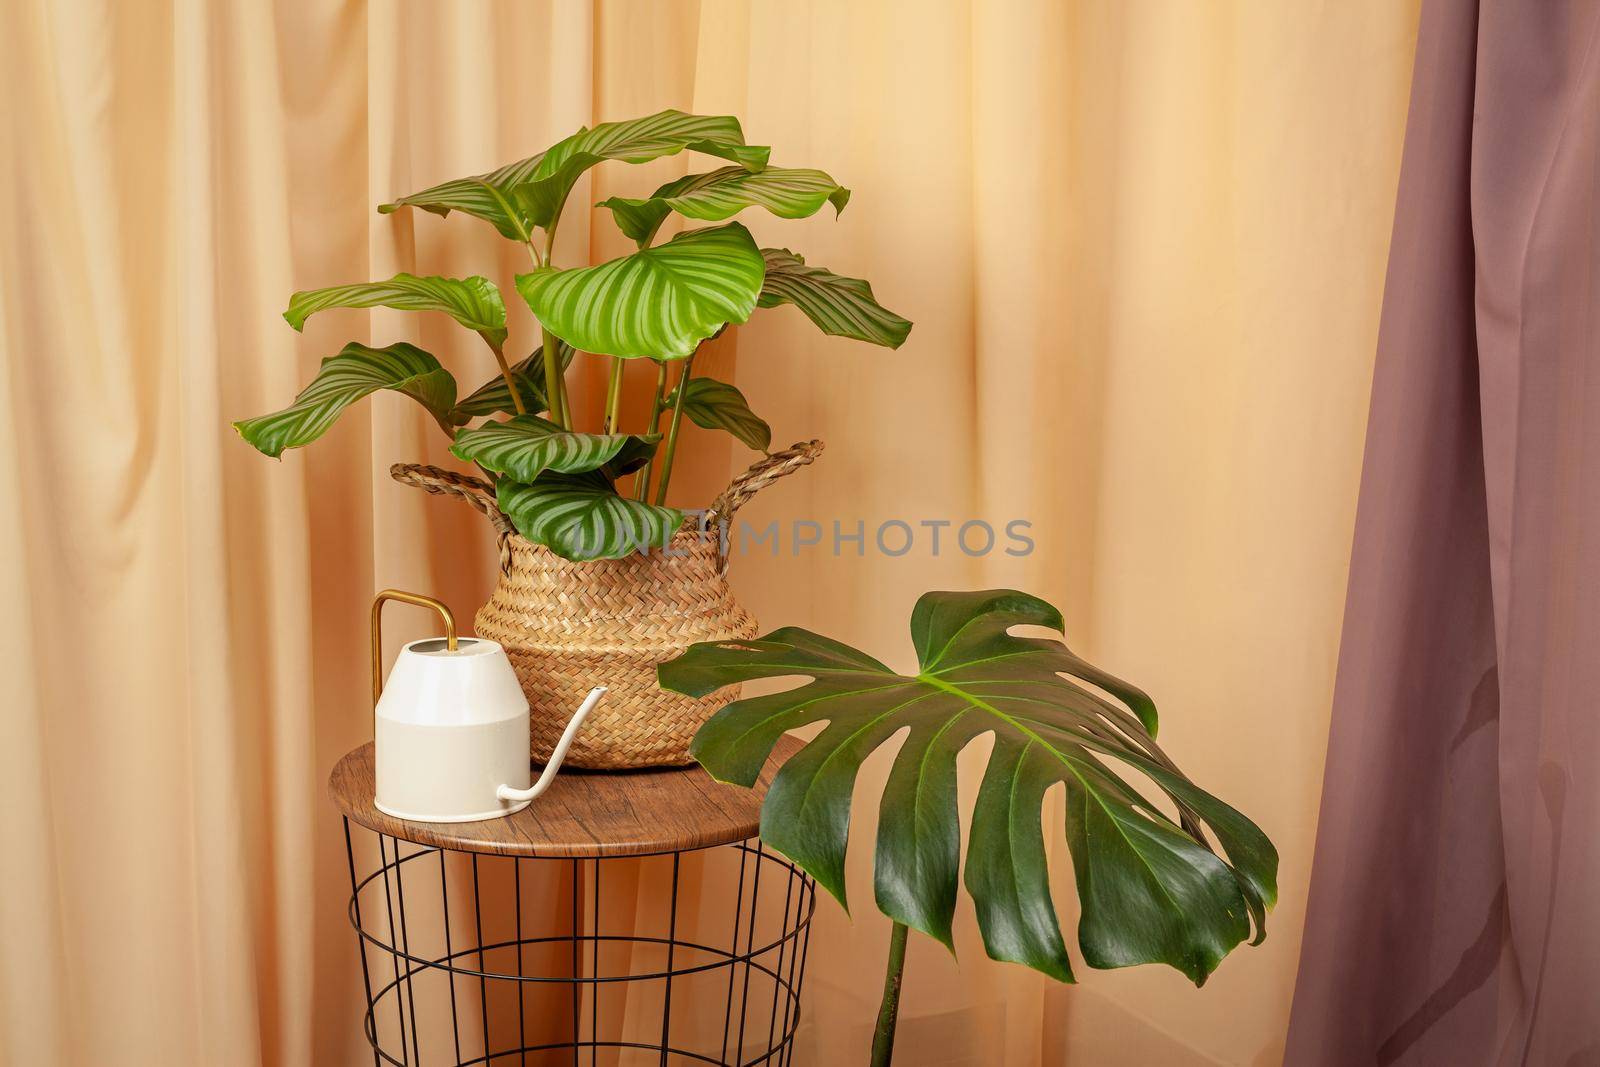 Still life with plants and watering can on a brown curtains background. by igor_stramyk